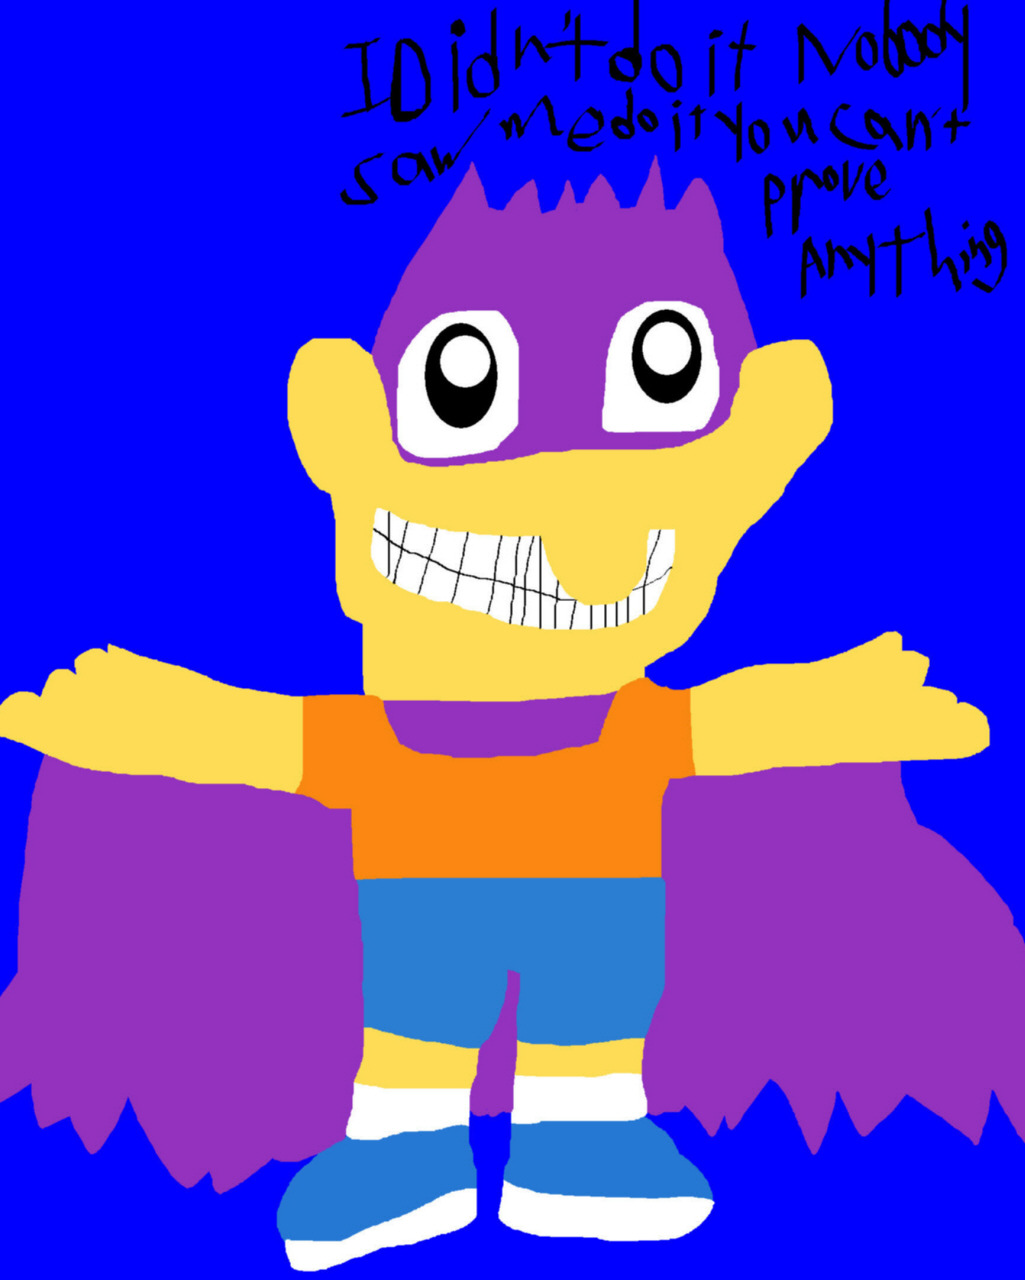 Bartman Innocent Until Otherwise Proven Guilty MS Paint^^ by Falconlobo